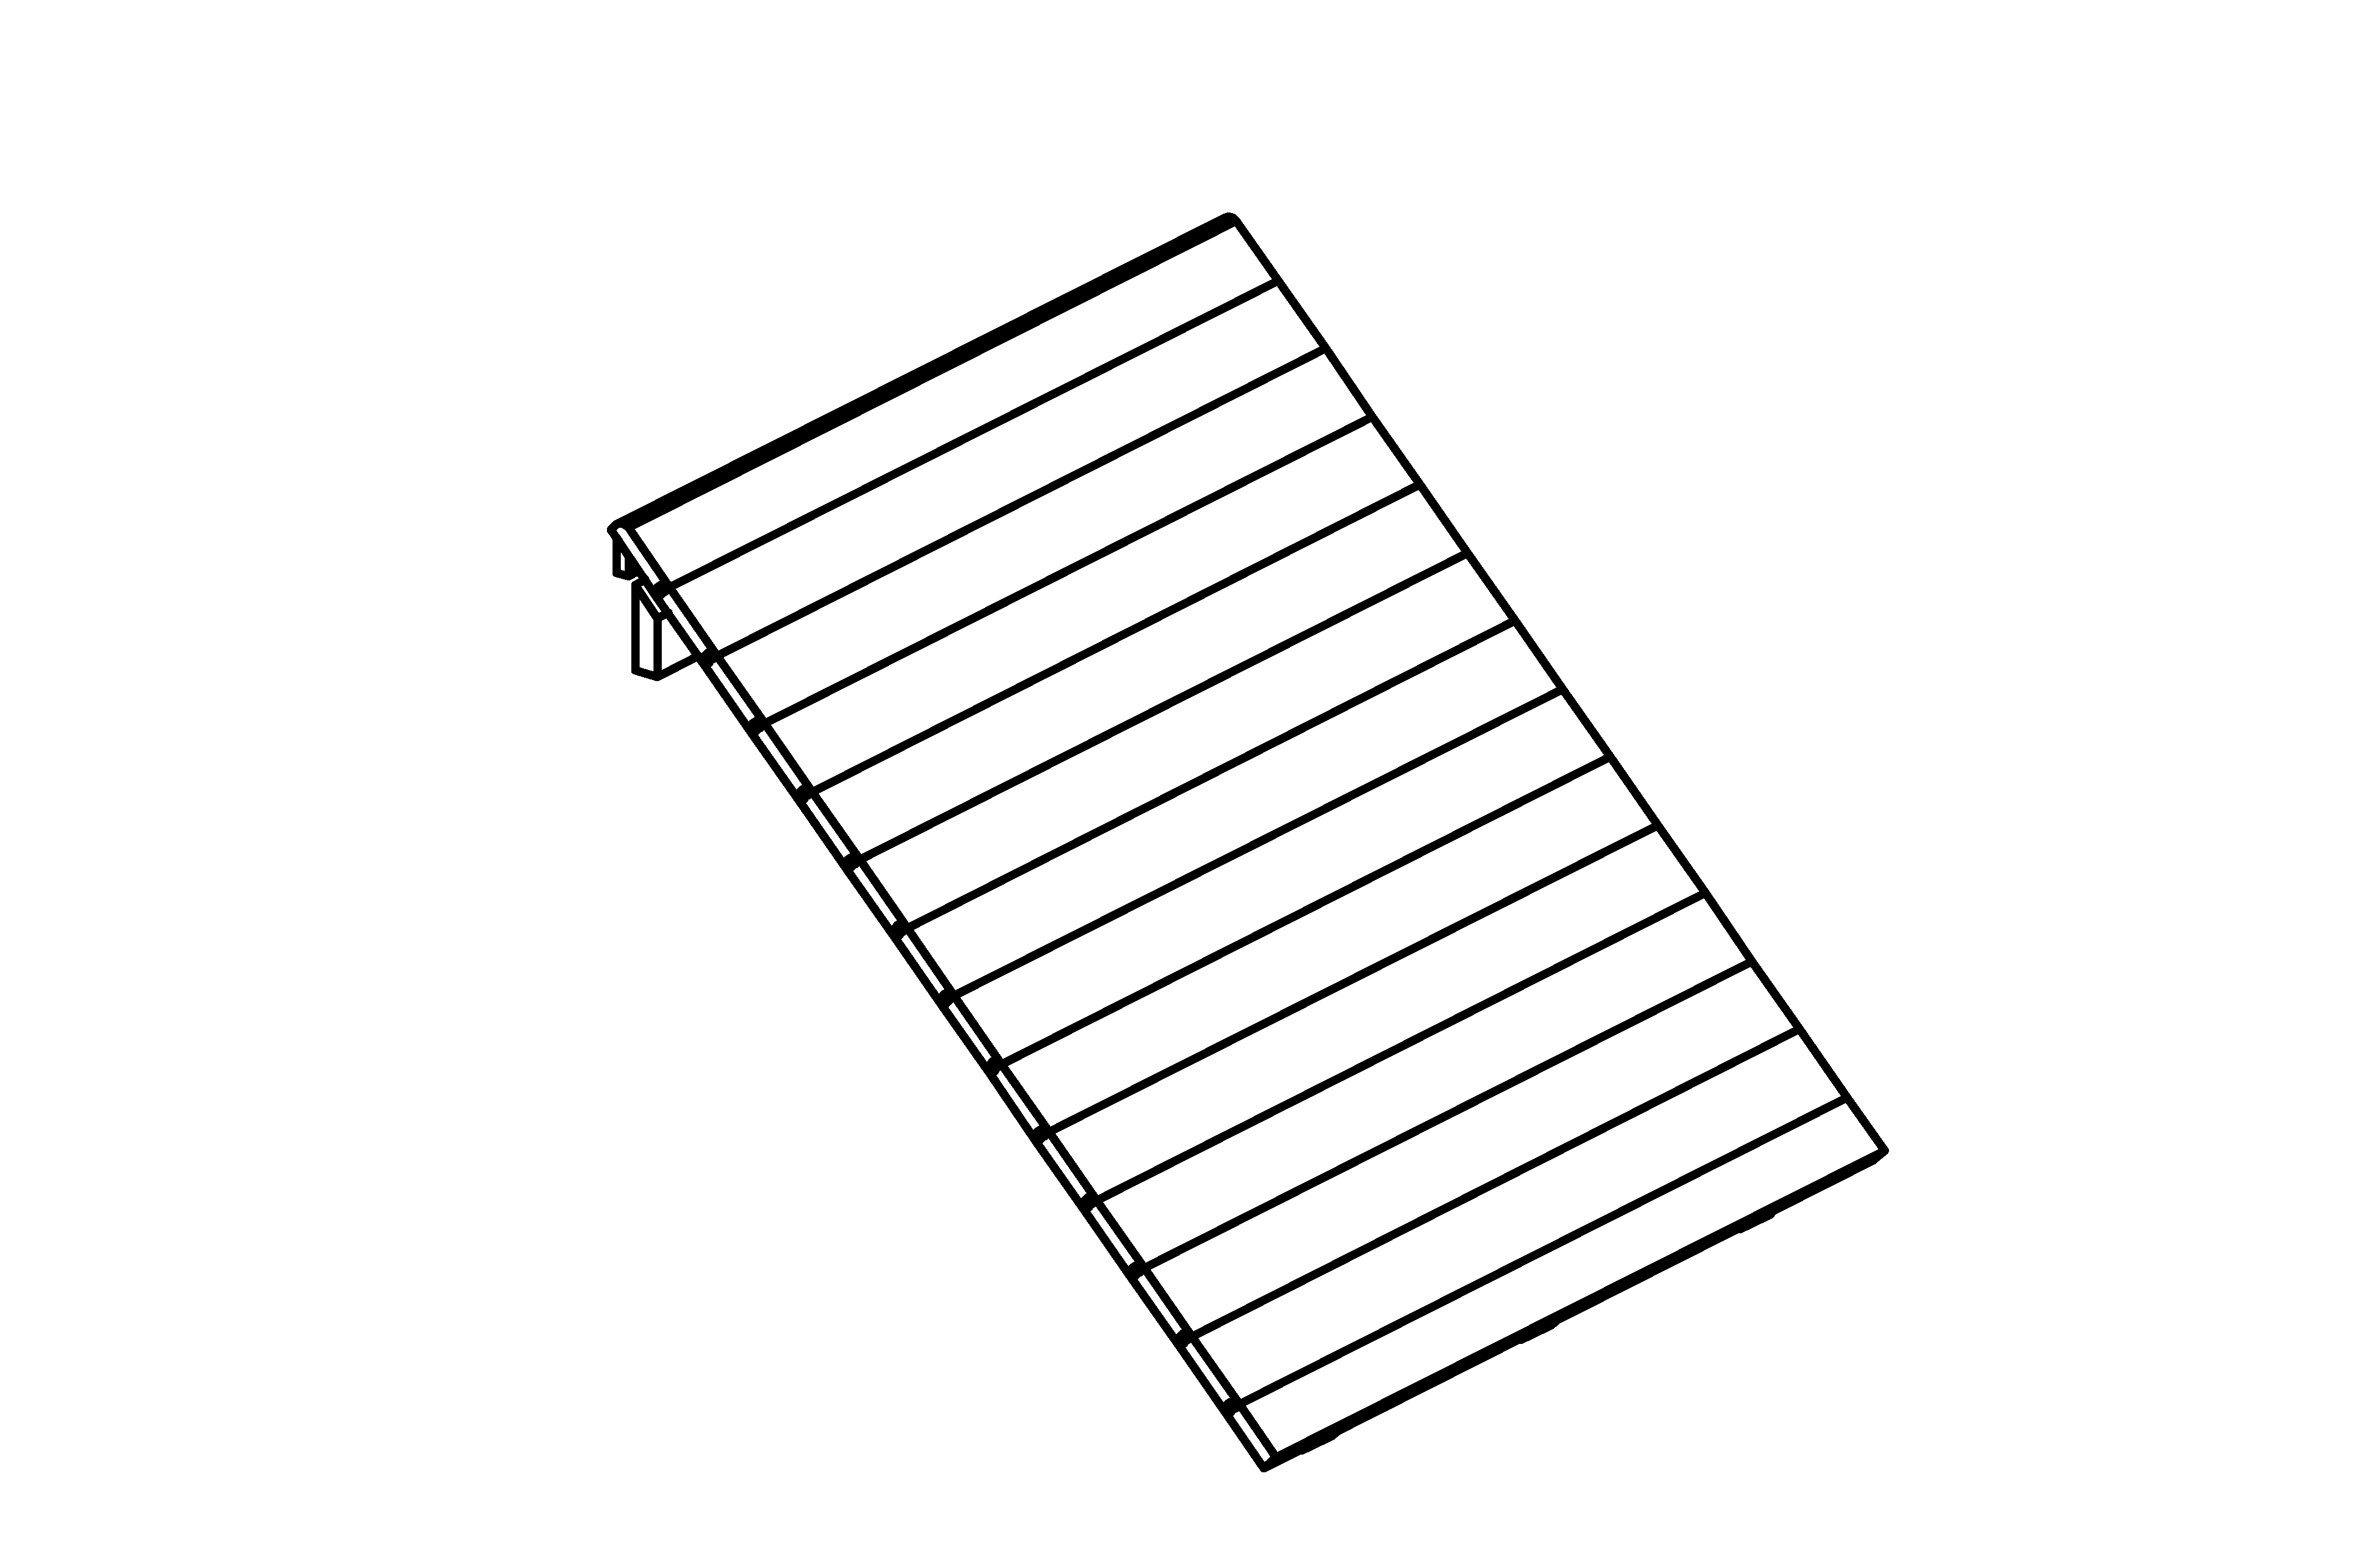 Inclined Wall, height = 1.50 m, width = 2 m